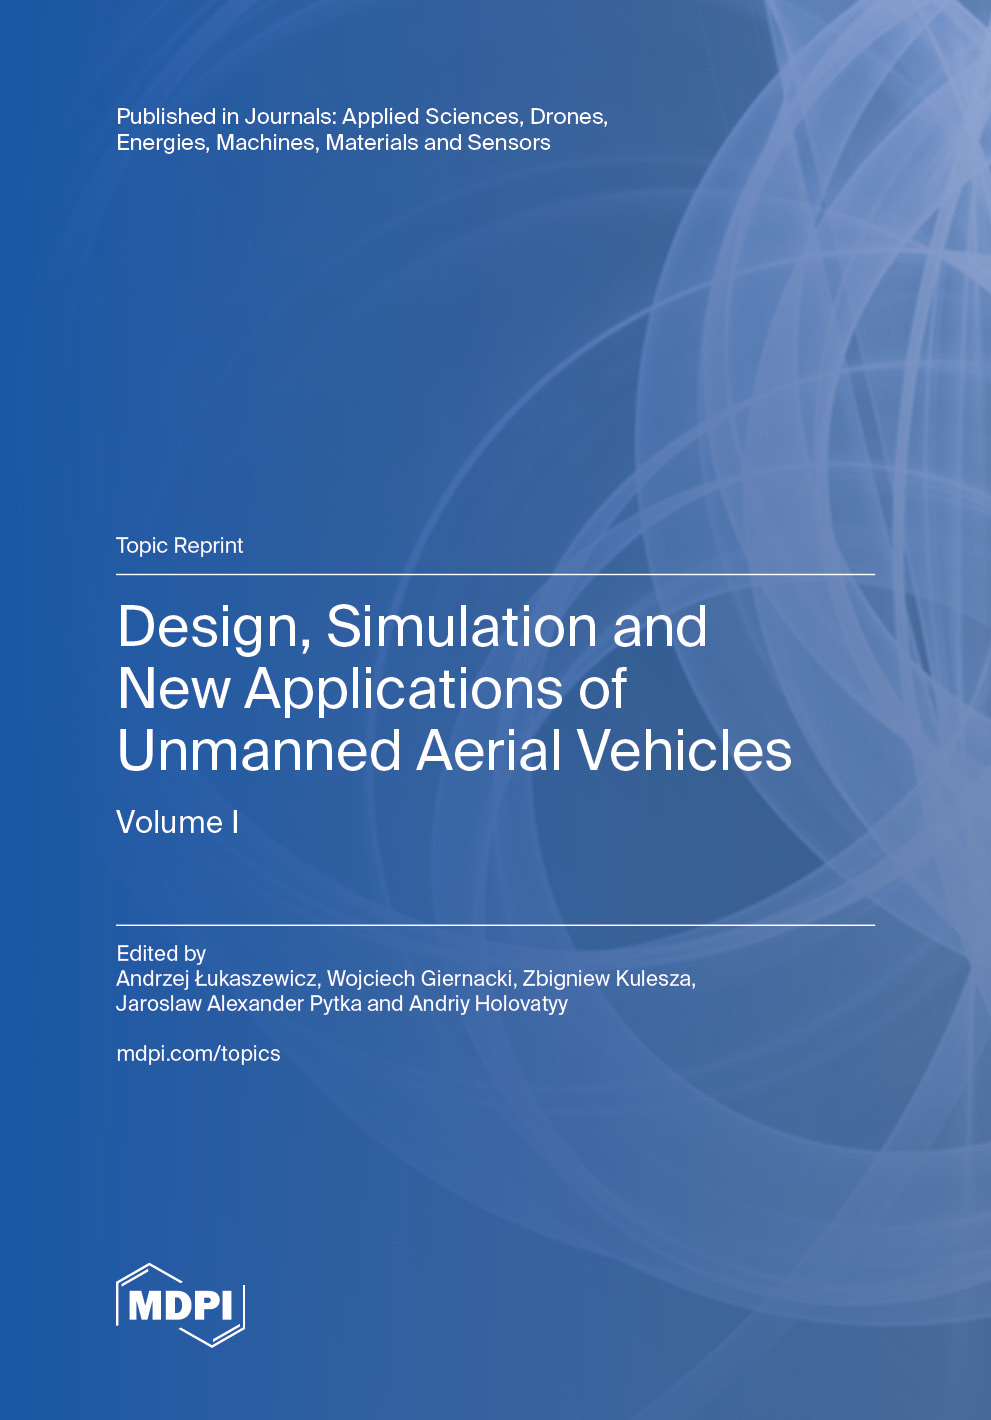 Design, Simulation and New Applications of Unmanned Aerial Vehicles